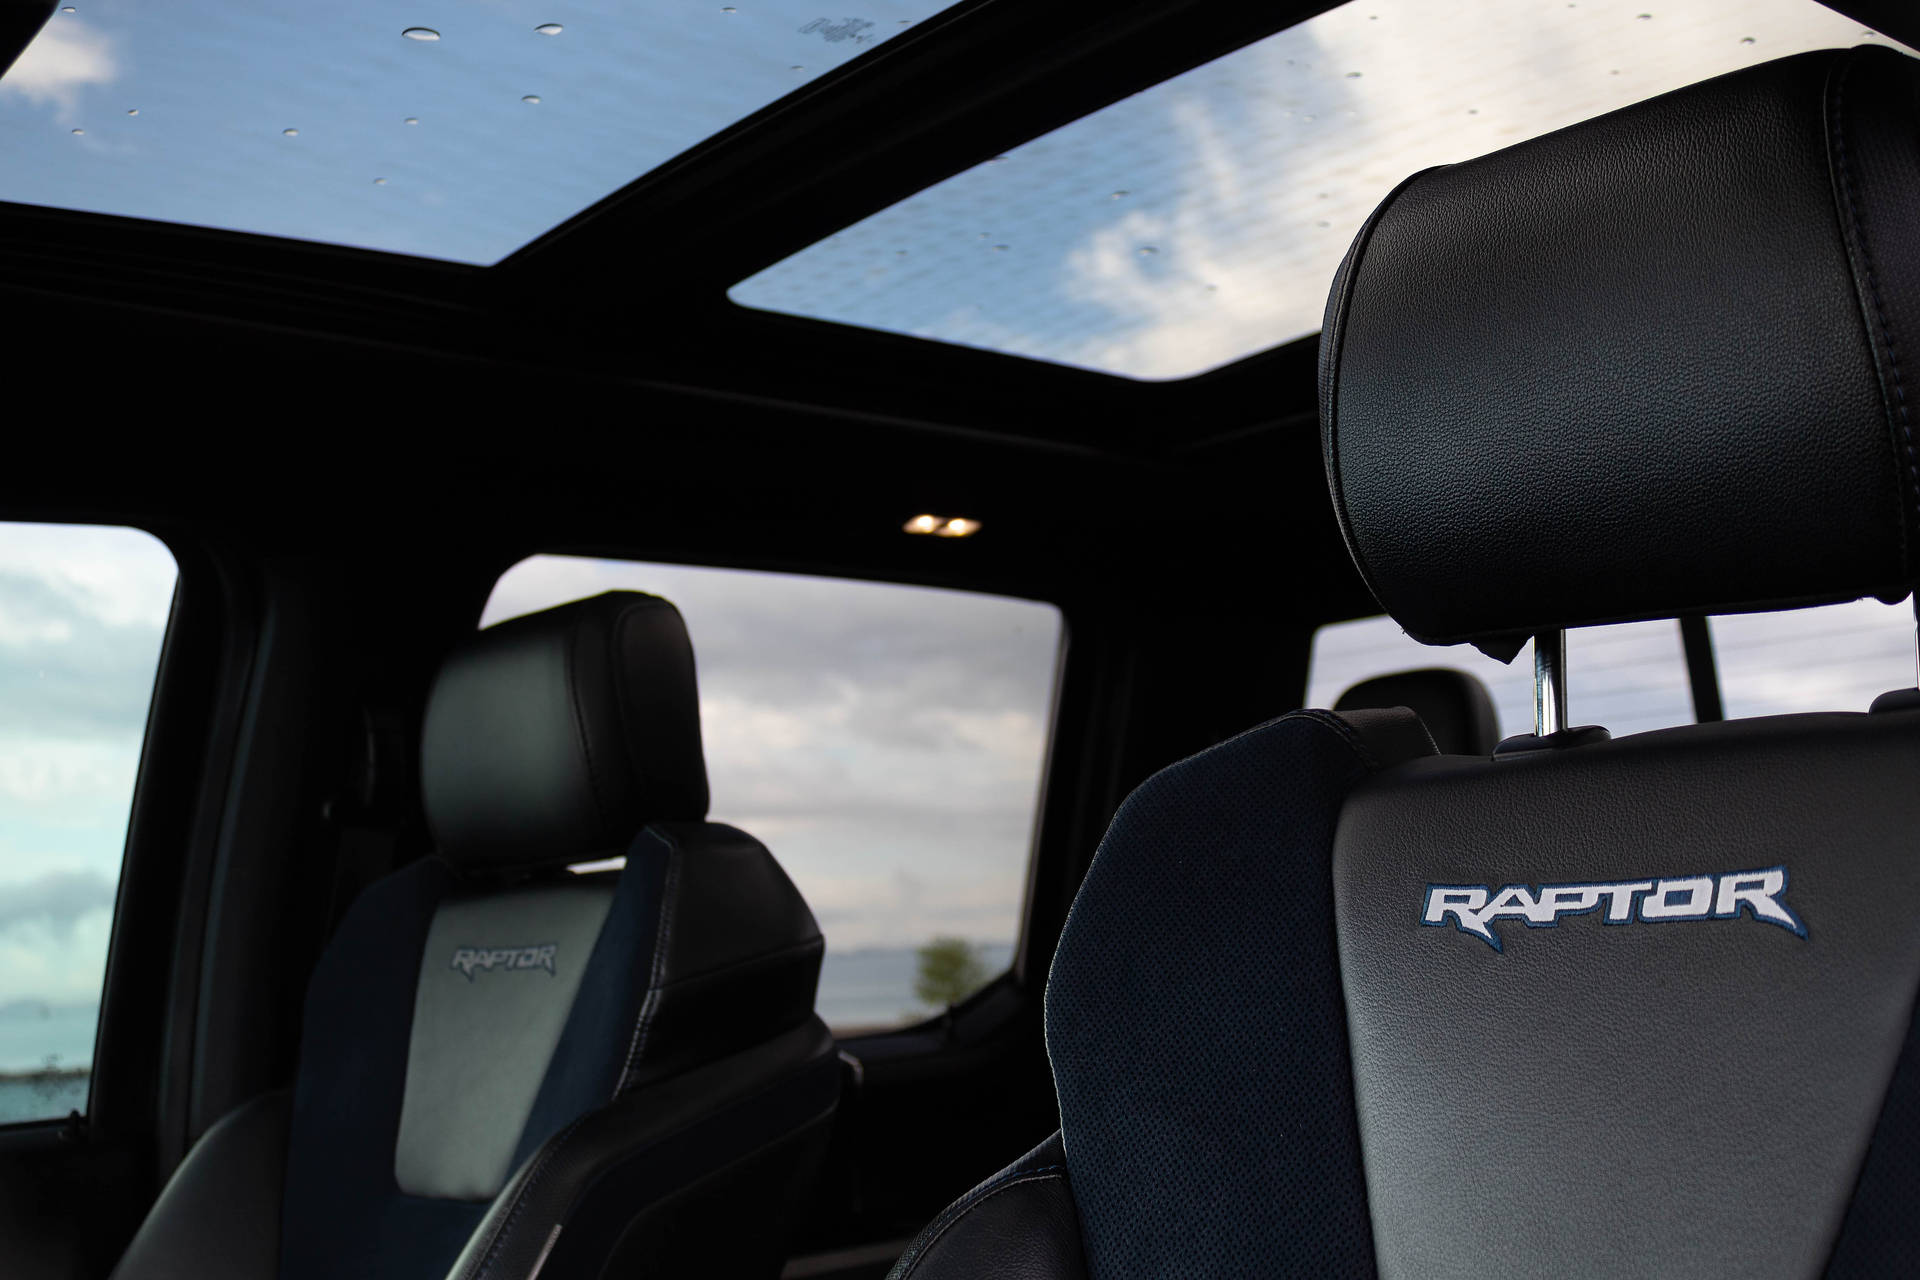 Powerful Ford Raptor With Panoramic Sunroof